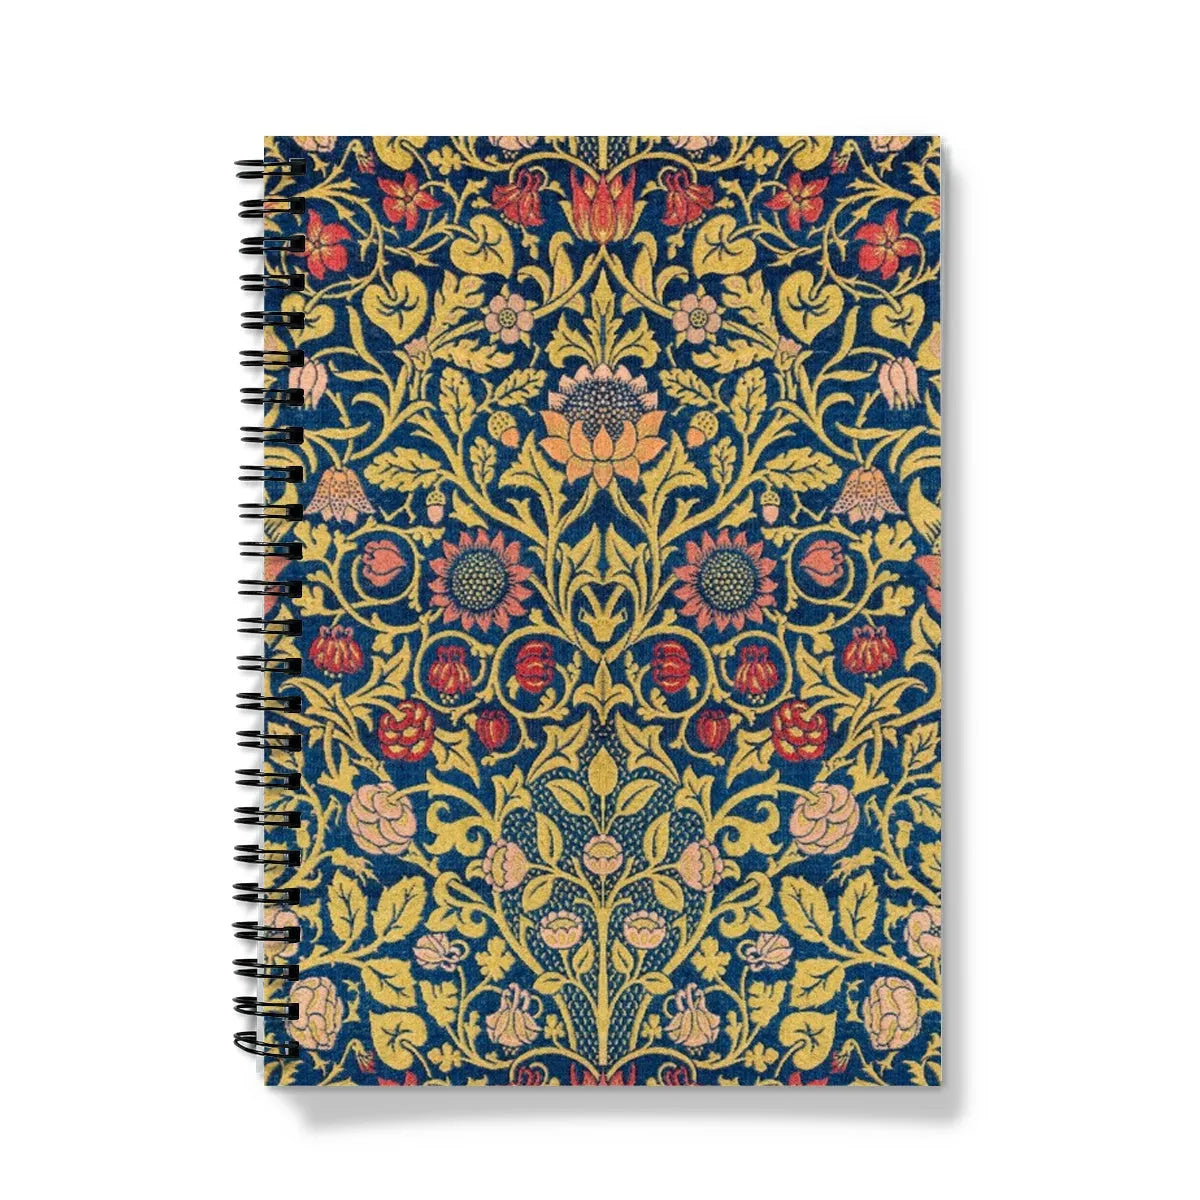 Violet And Columbine By William Morris Notebook - A5 / Lined - Notebooks & Notepads - Aesthetic Art